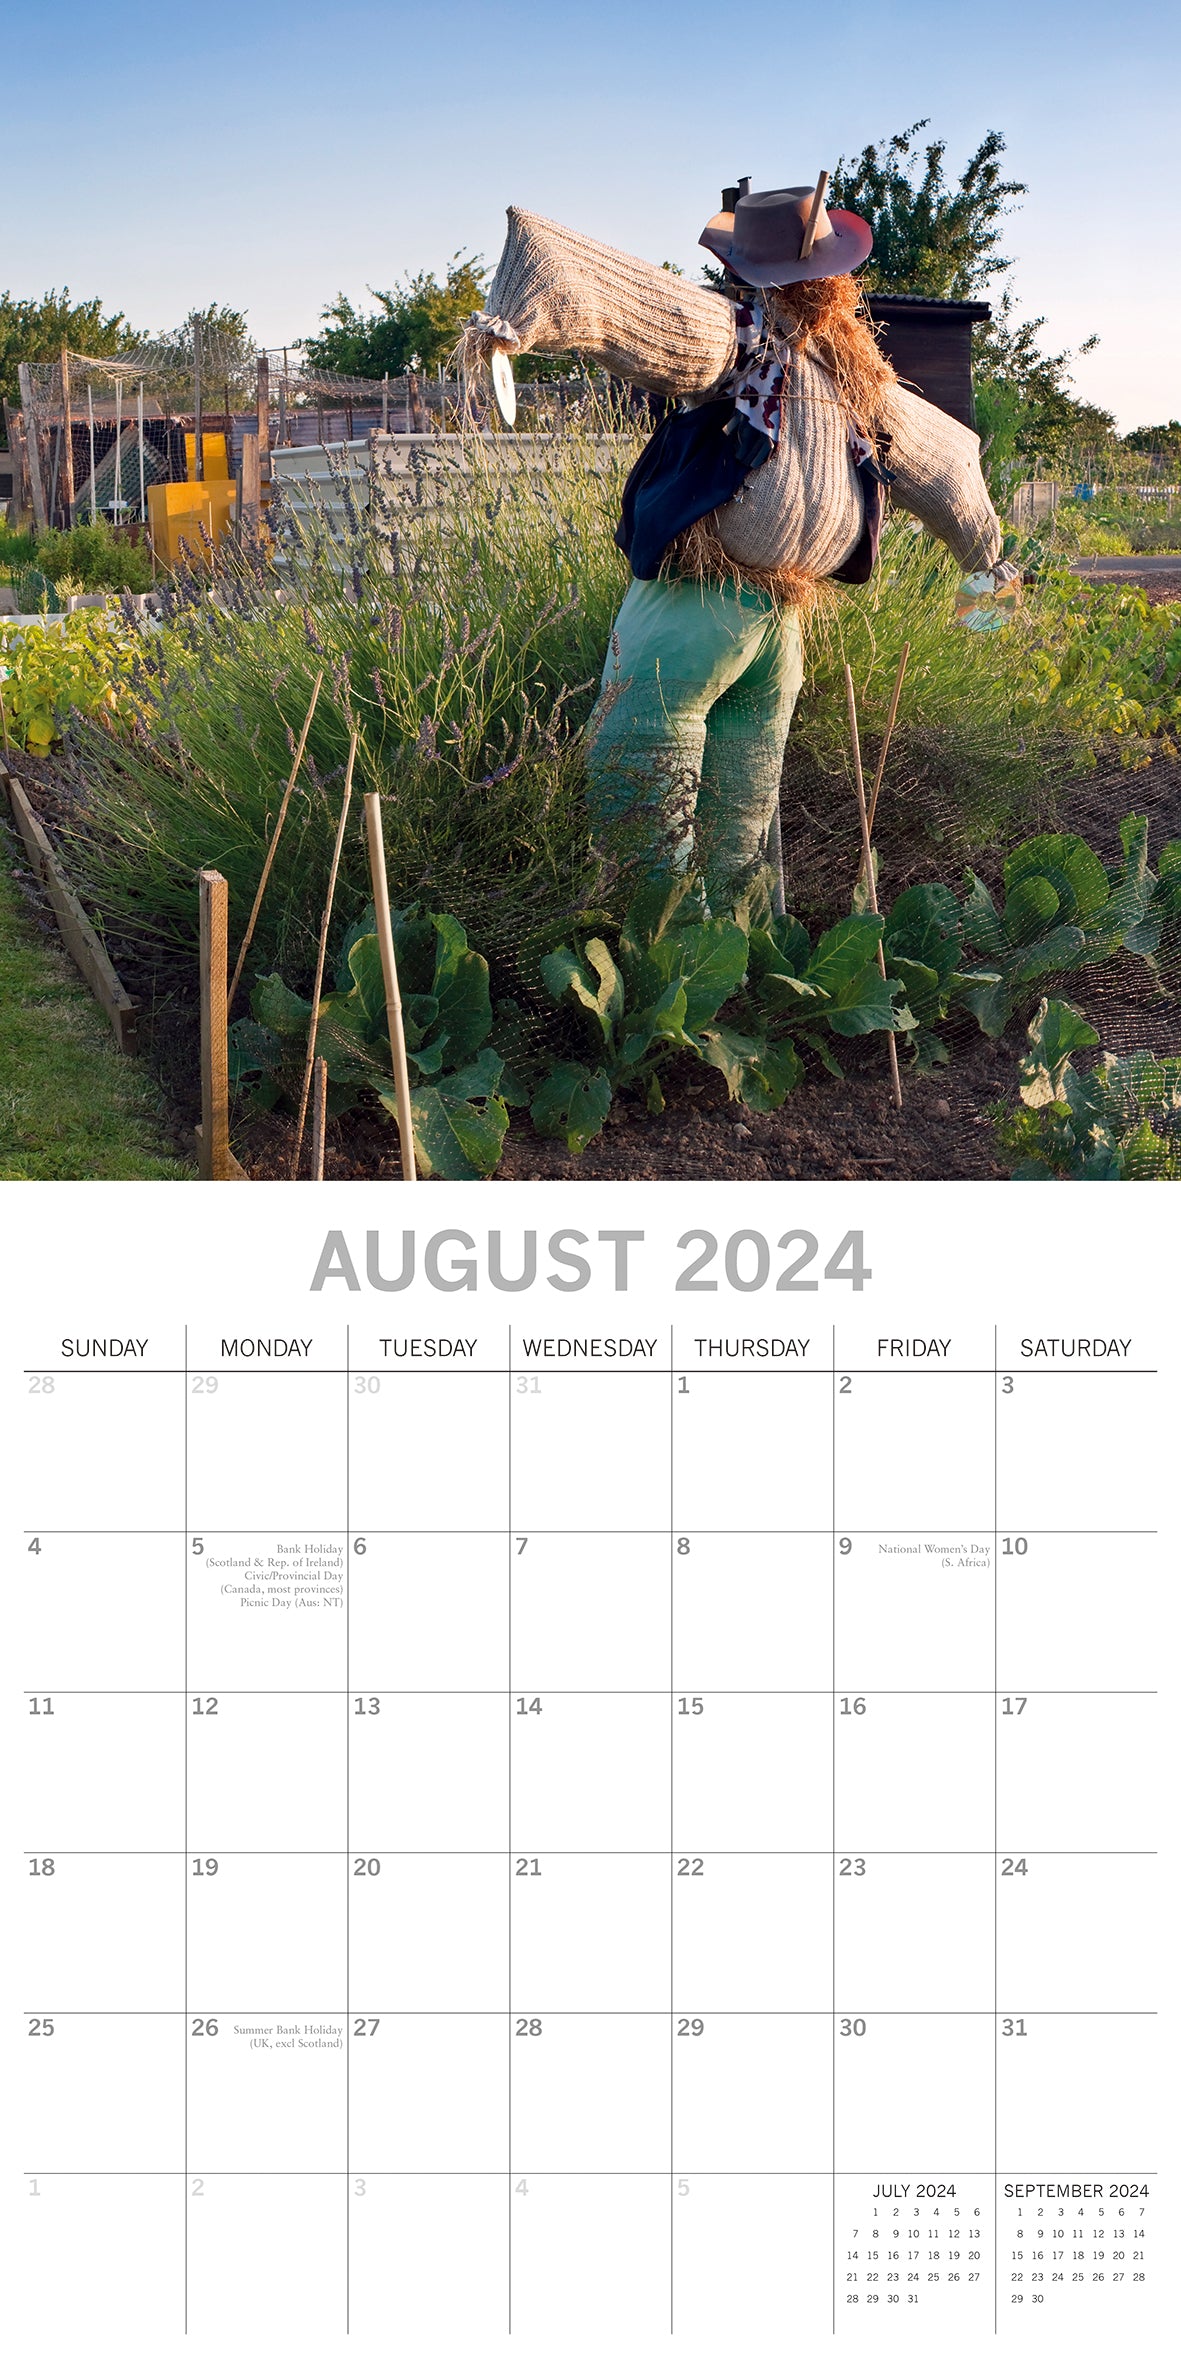 Allotment Gardening - 2024 Square Wall Calendar 16 Months Floral Planner Gift